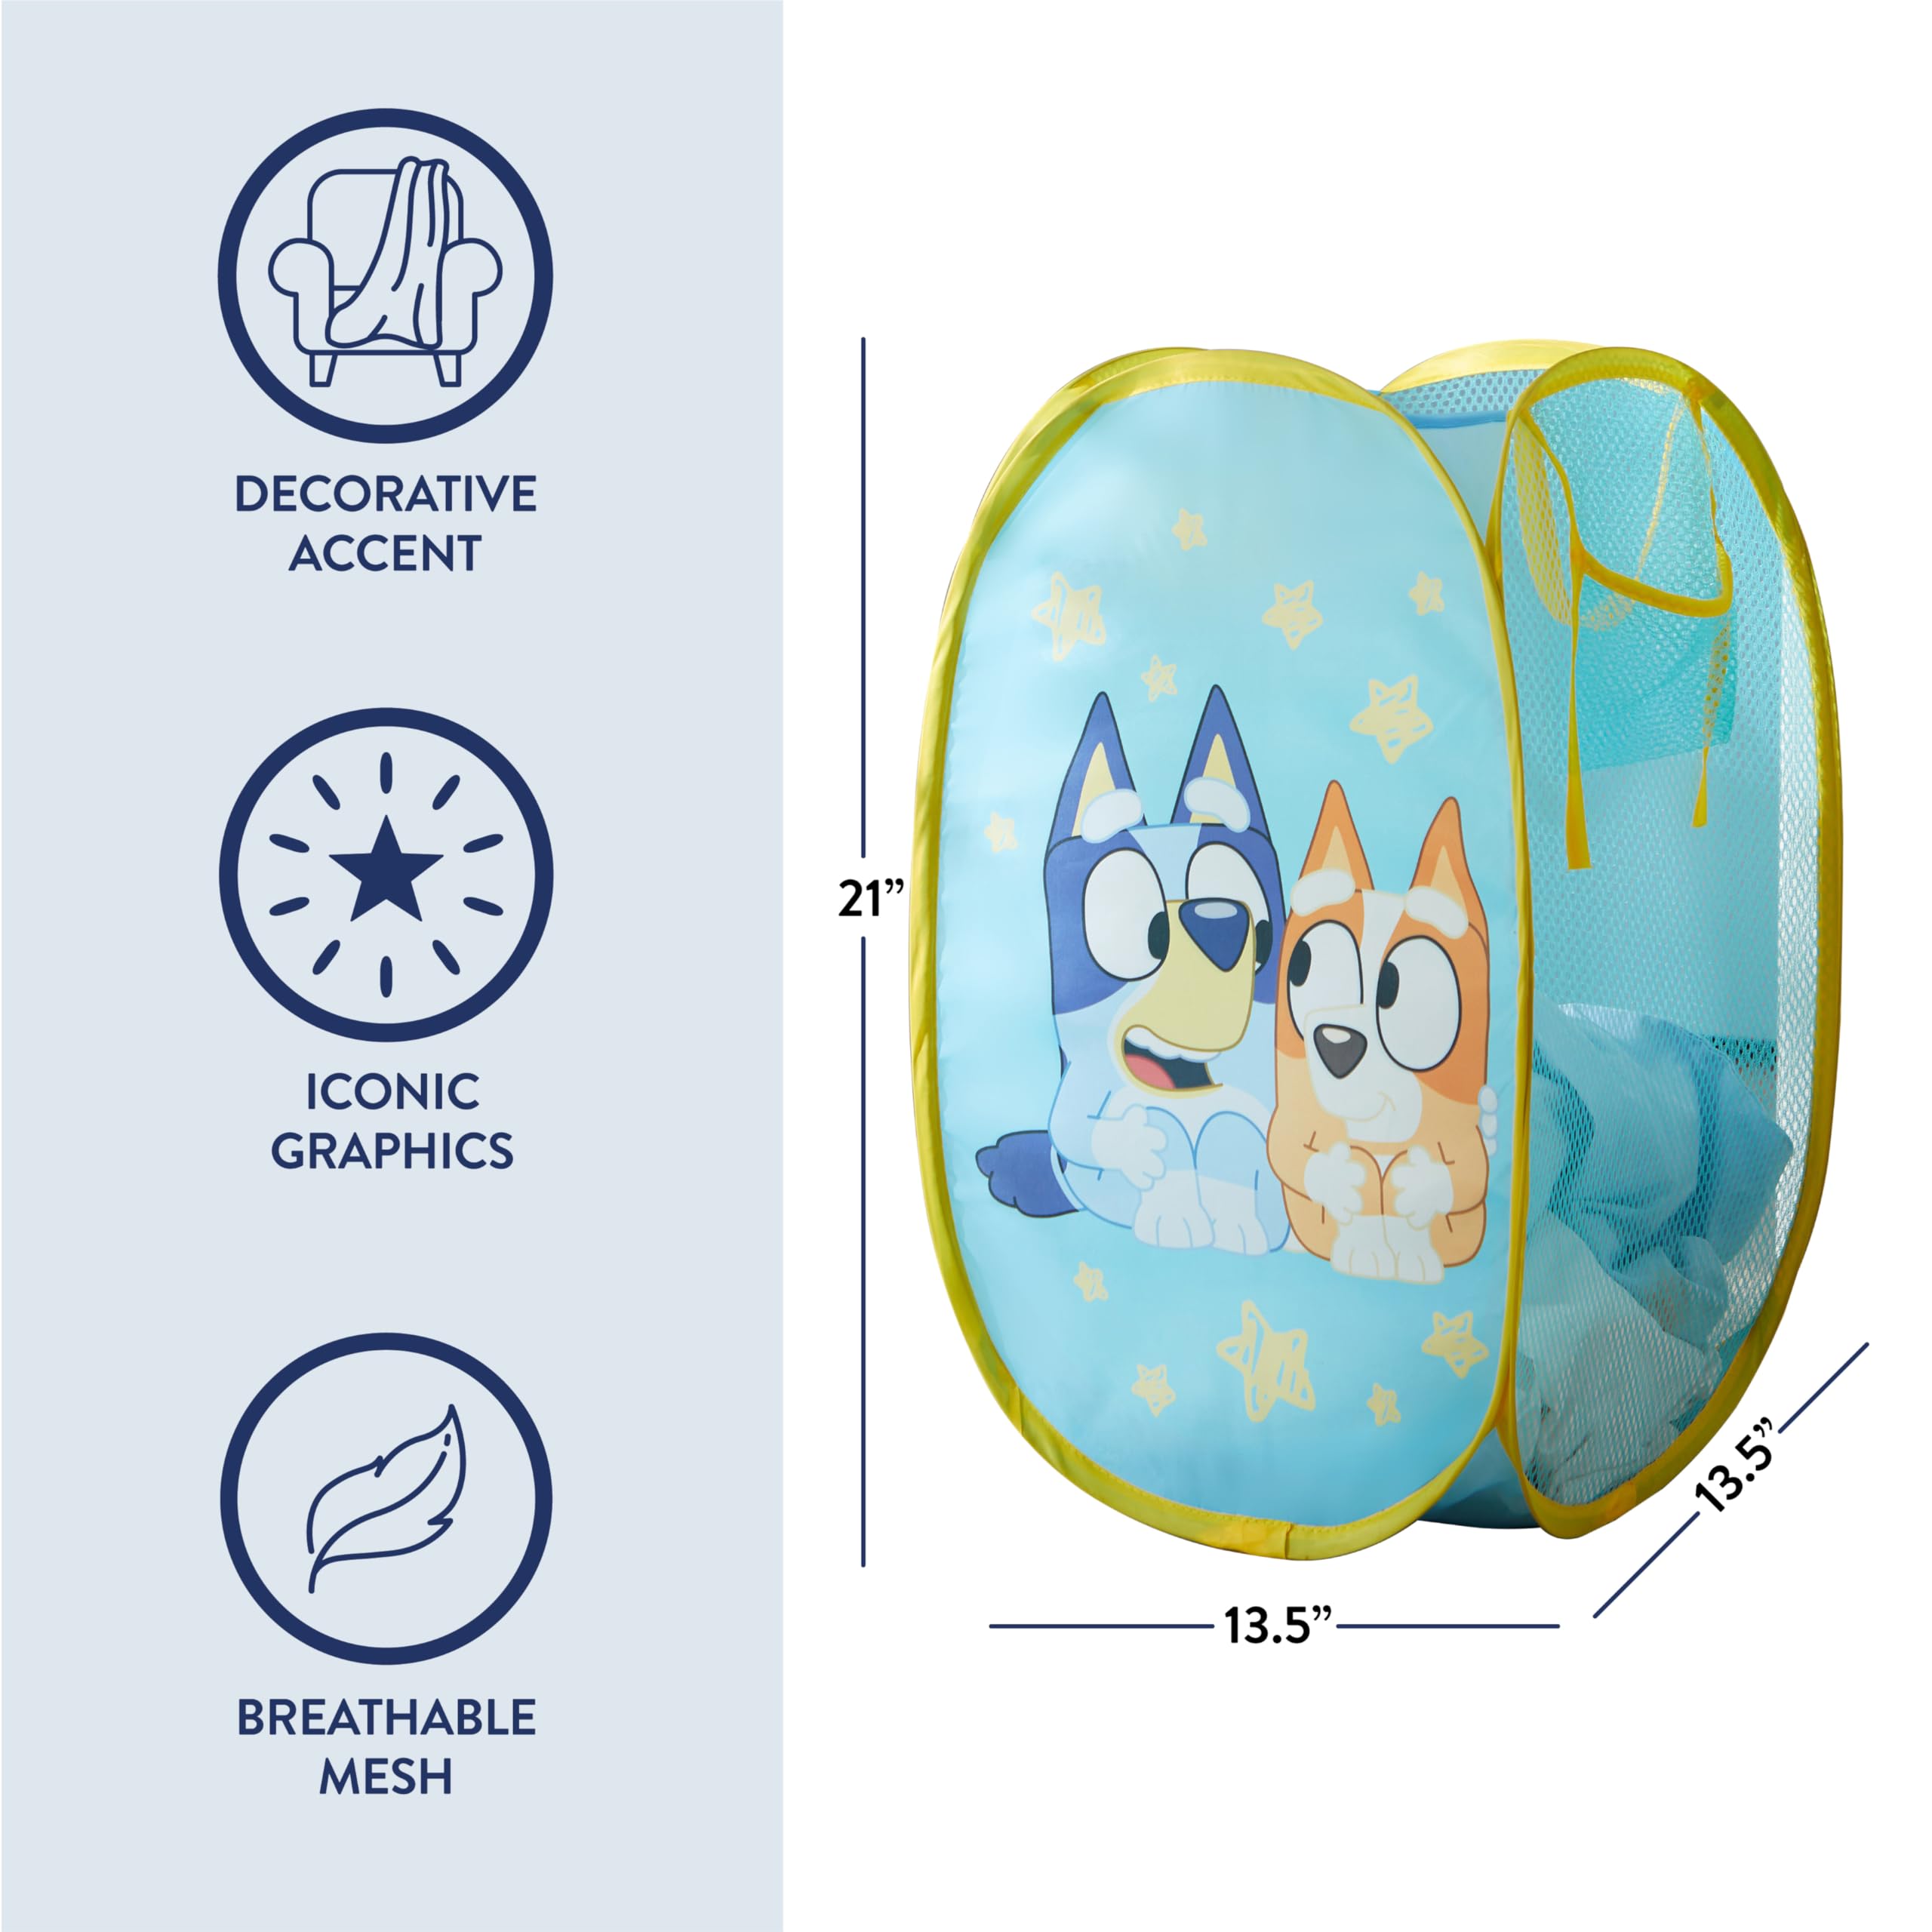 Bluey Pop Up Hamper with Durable Carry Handles, with Bluey and Bingo, 21'' H x 13.5'' W X 13.5'' L